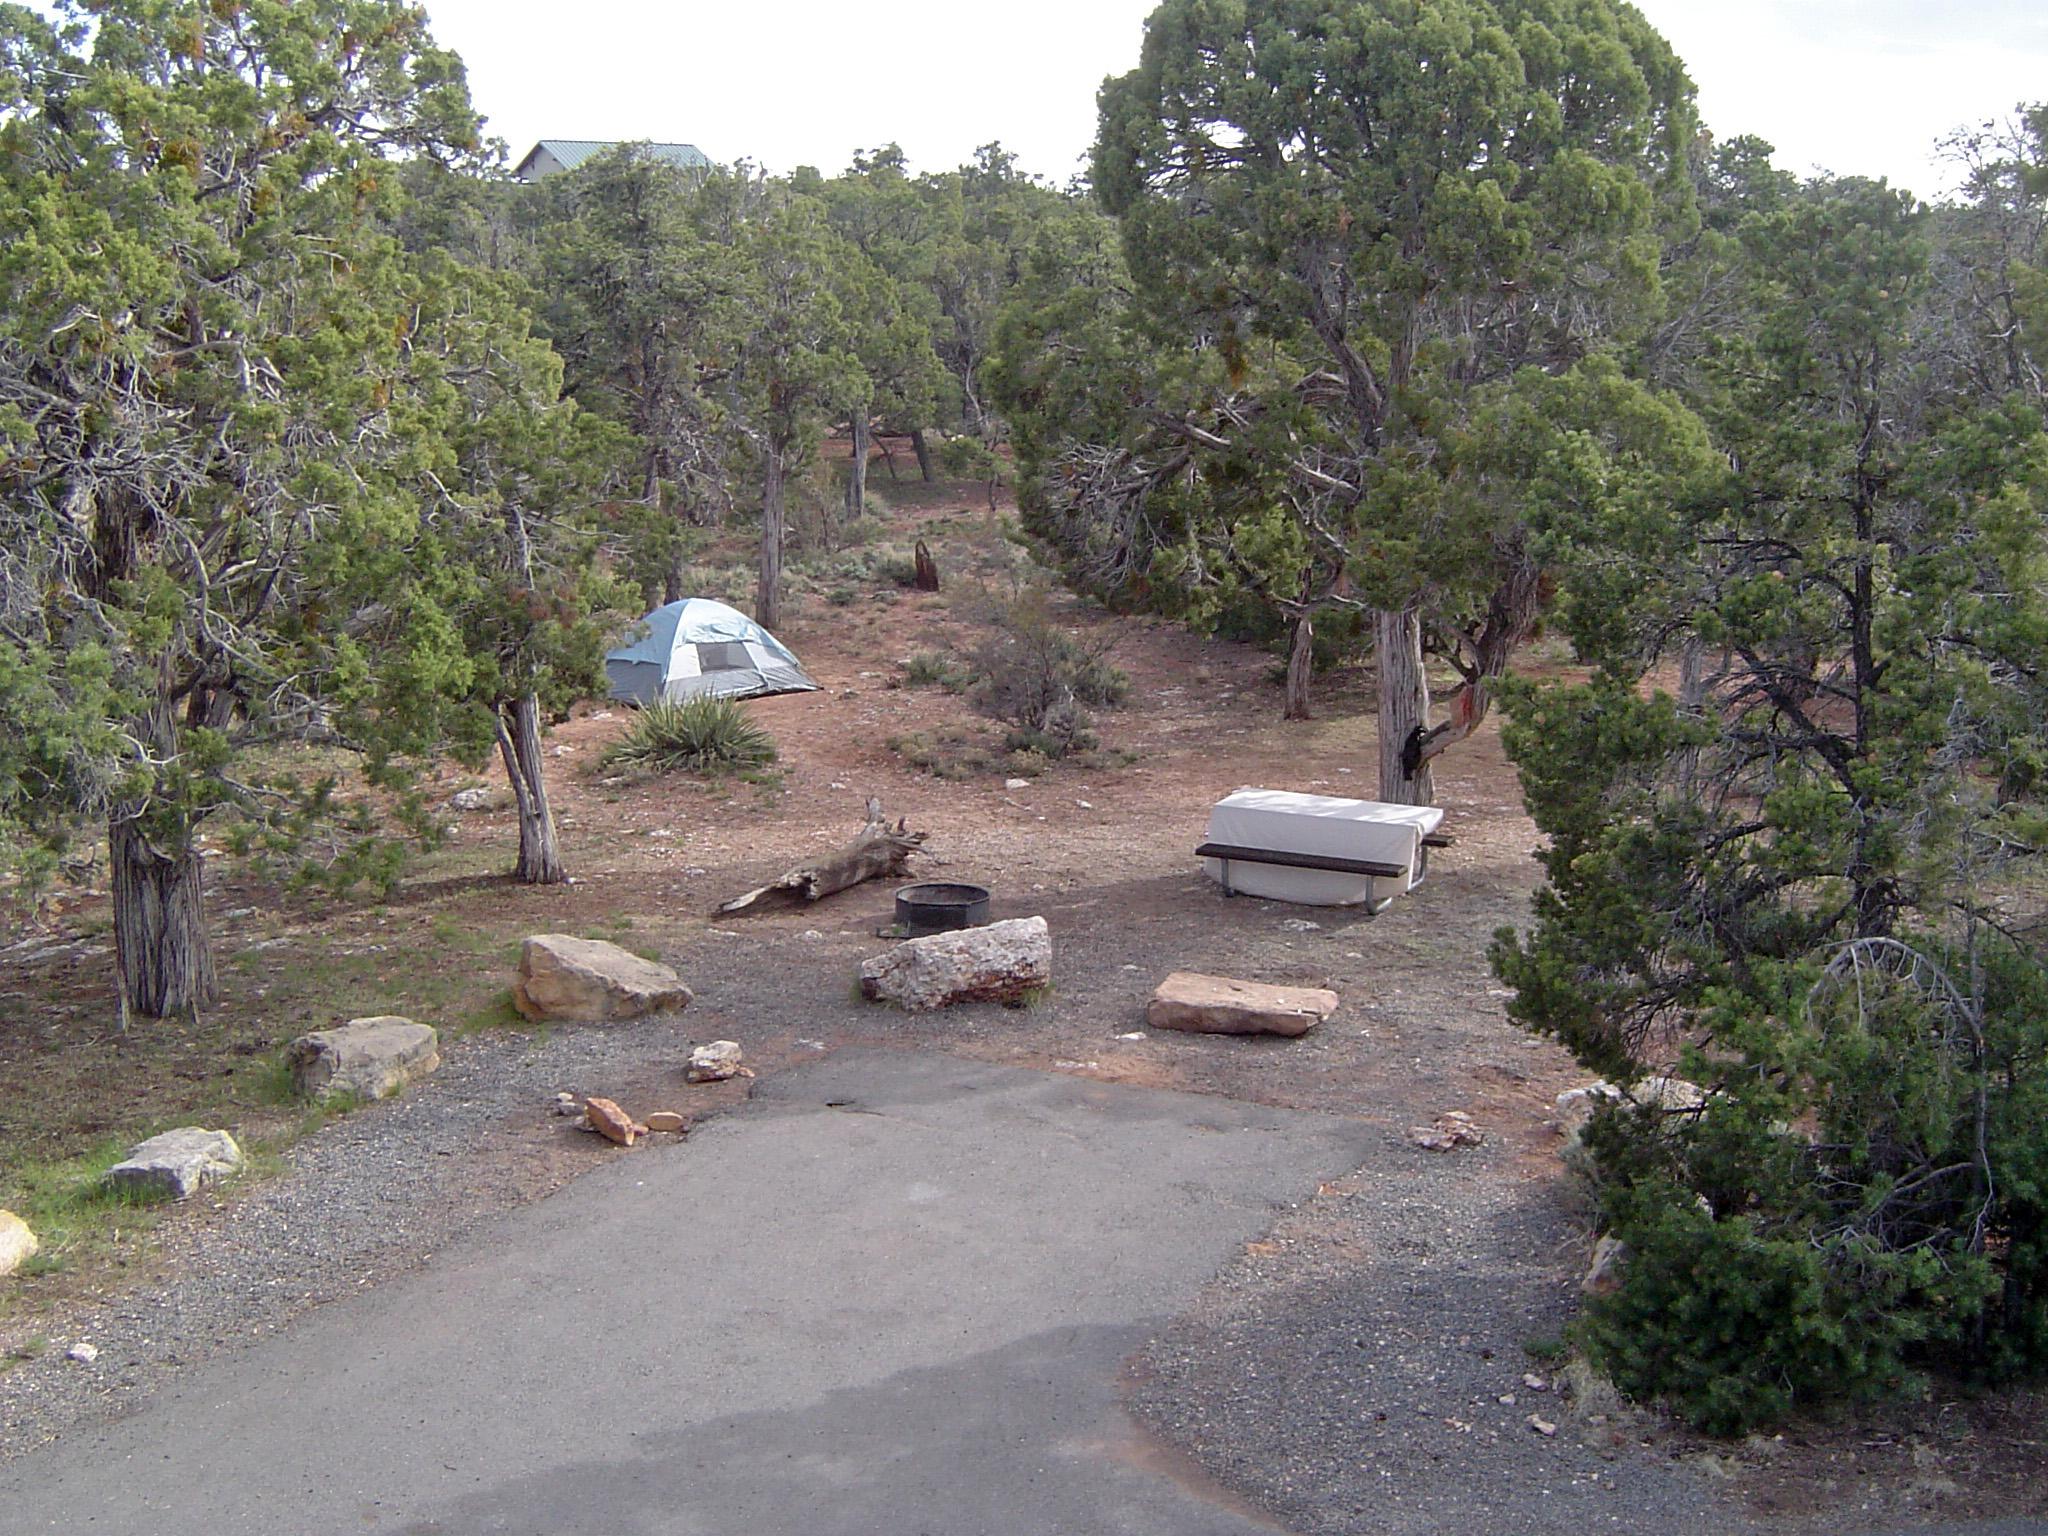 An empty campsite containing only a tent, draped picnic table, and fire ring